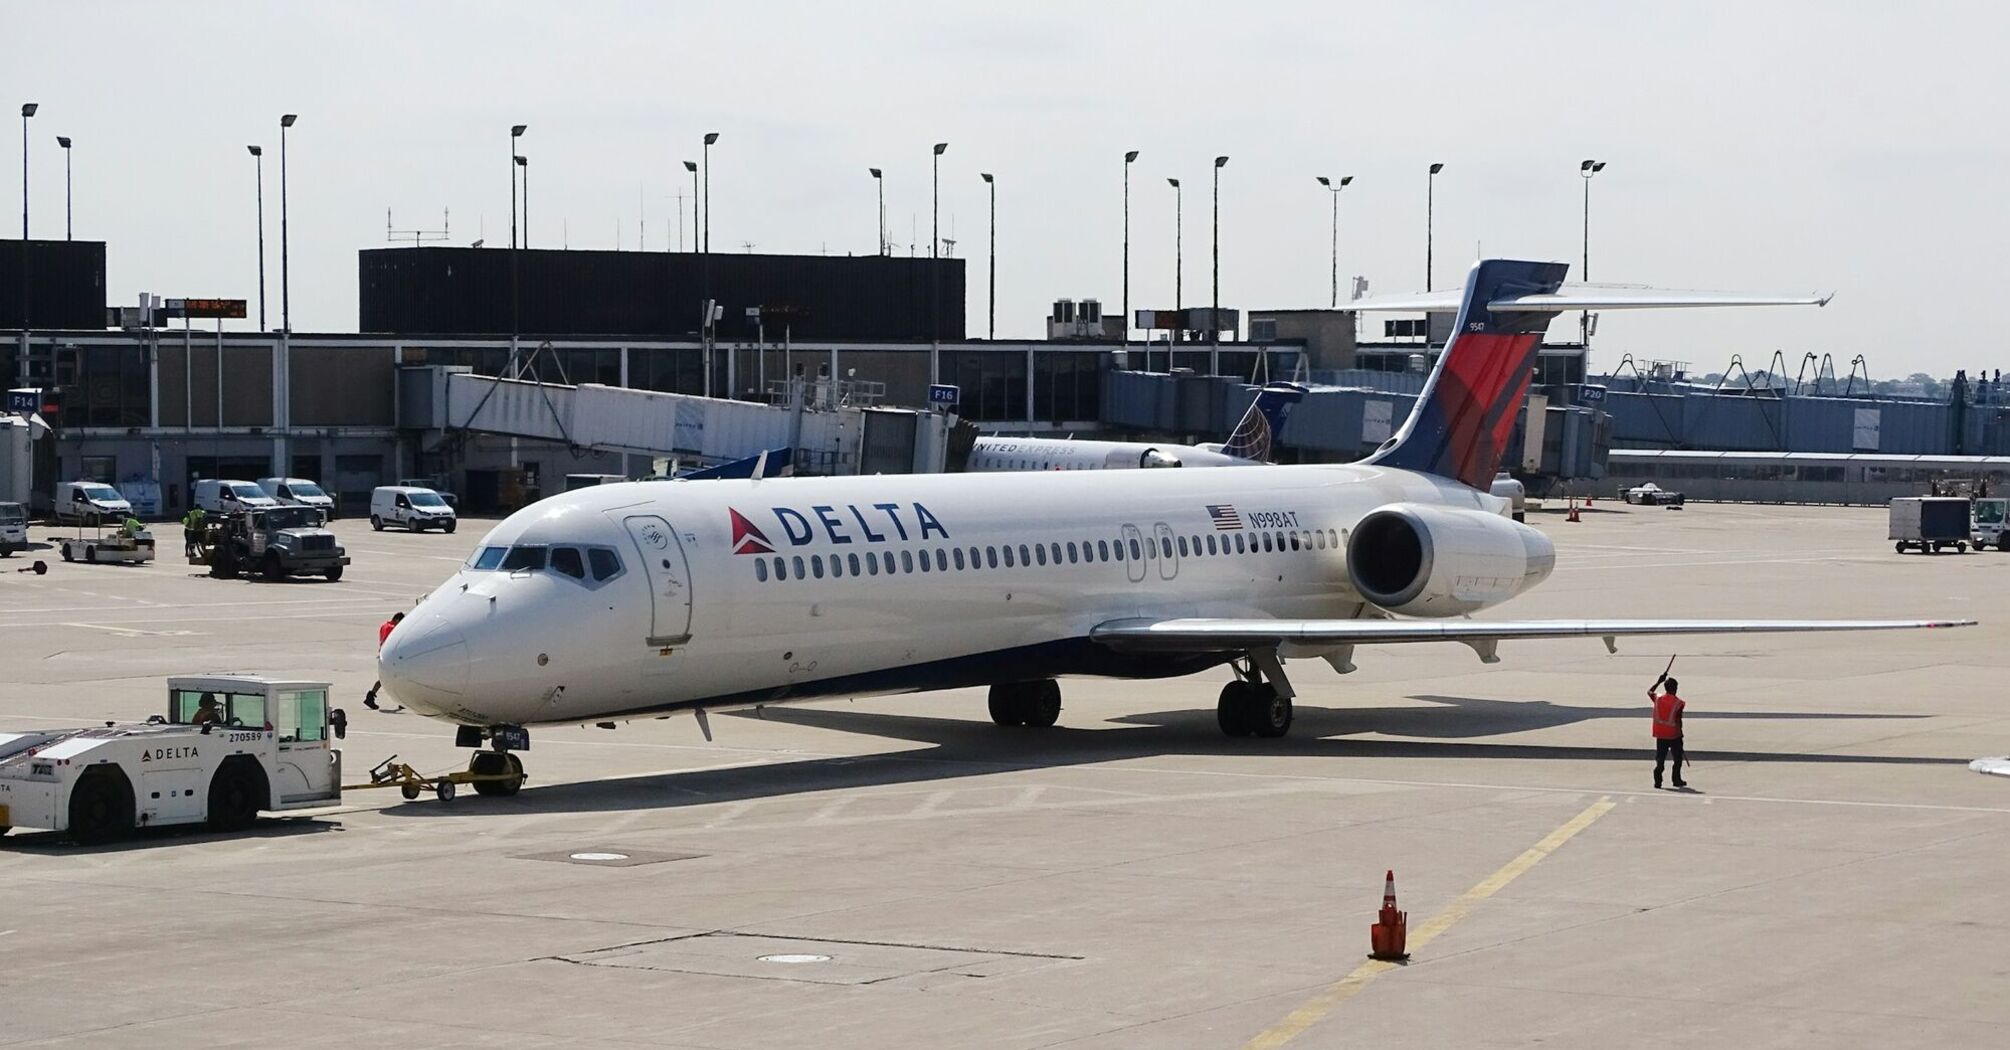 Delta Air Lines plane at airport gate